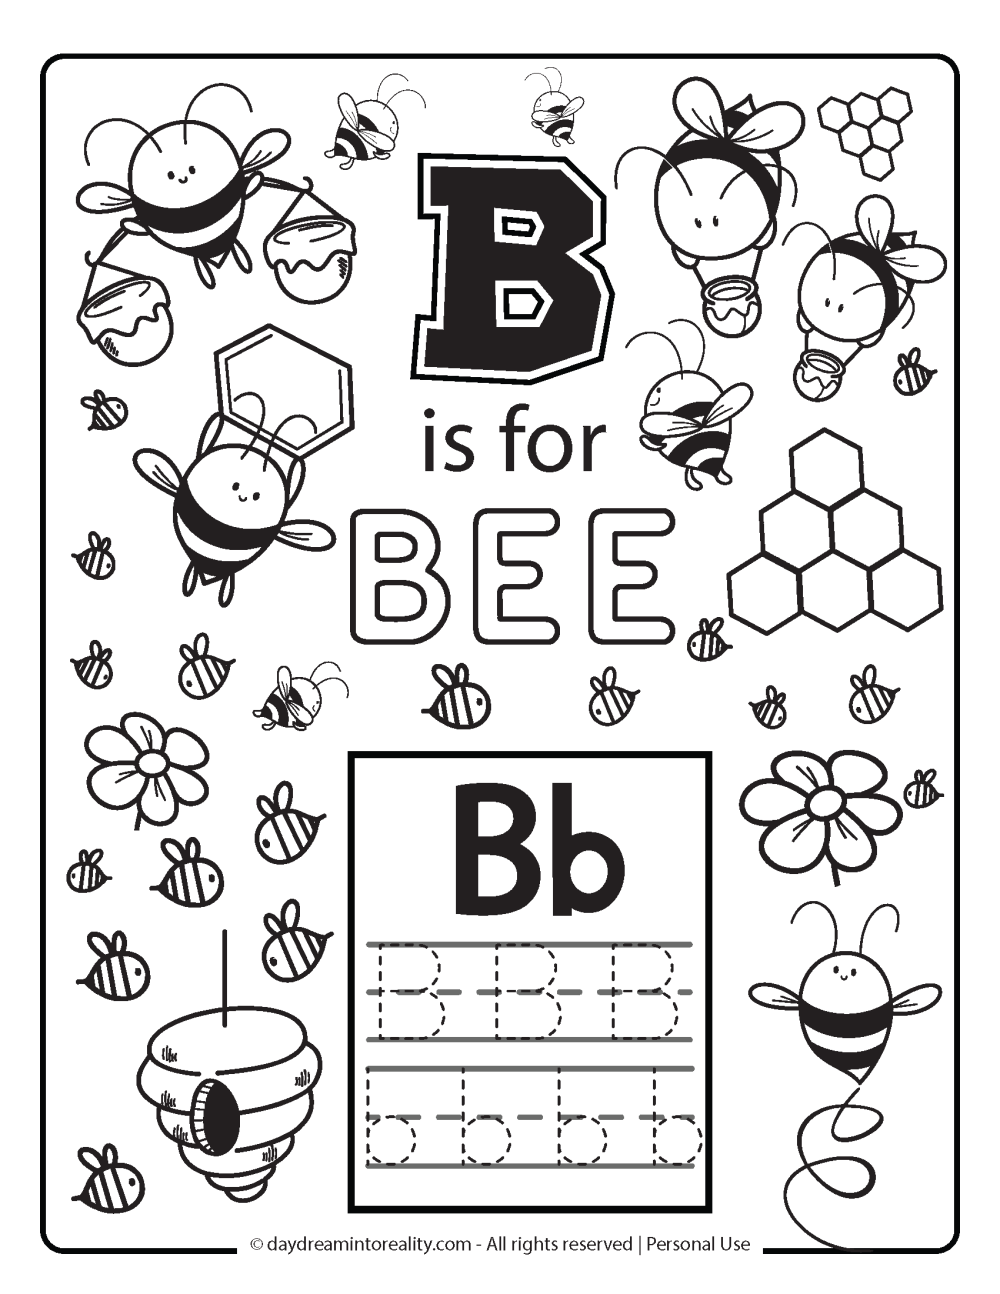 b is for bee coloring page free printable